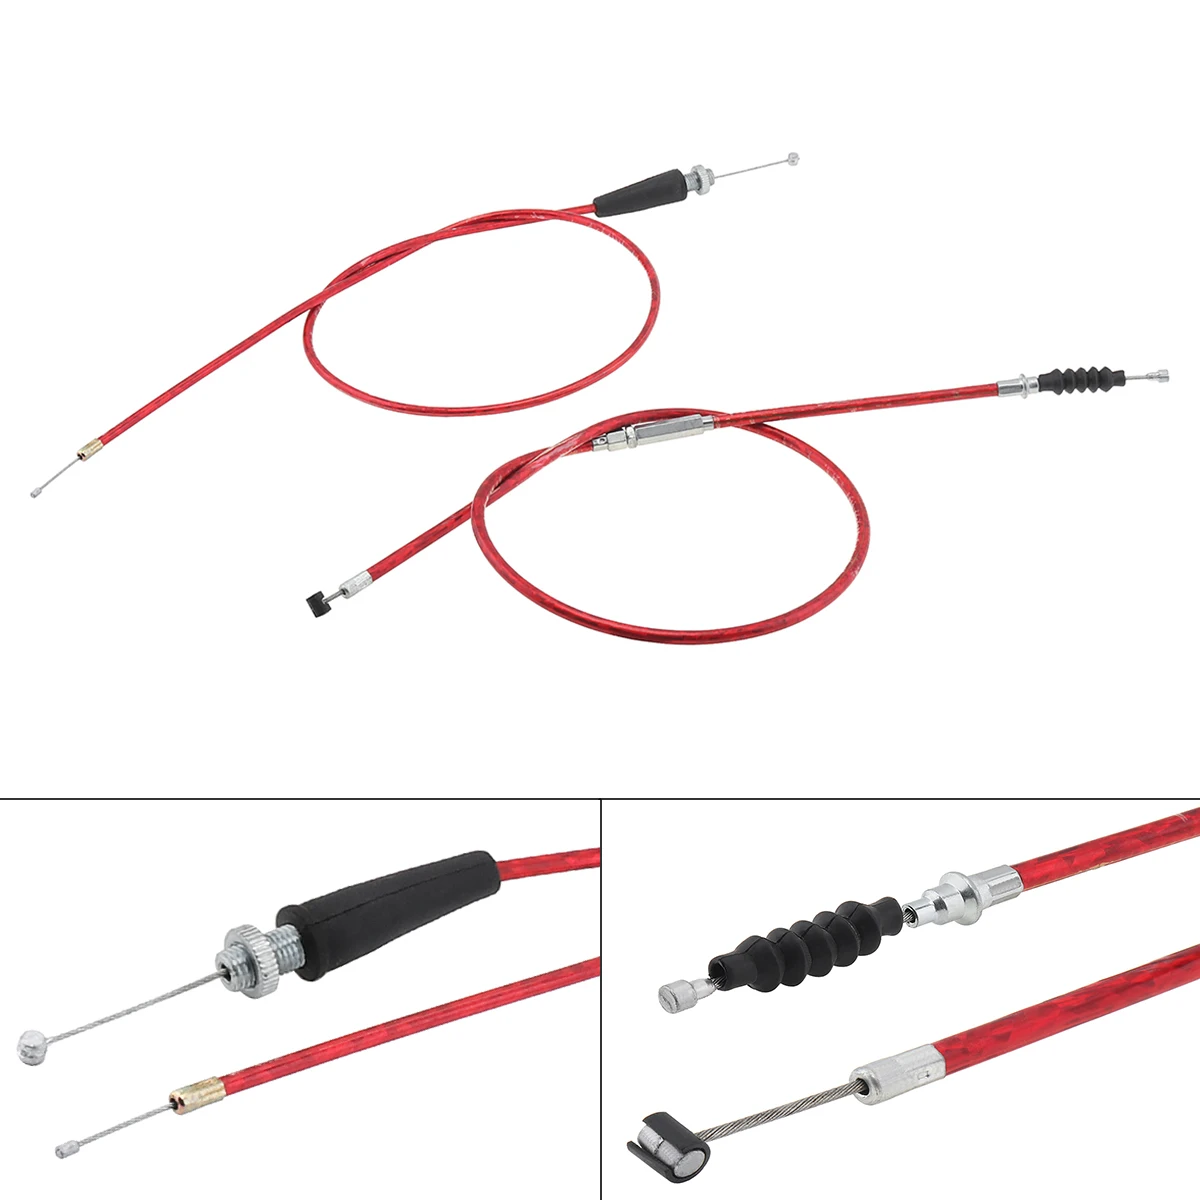 

Throttle Clutch Cable Adjustable Accelerator Cable for 90cc 110cc 125cc 140cc 4-Stroke Bike Most Chinese Import Pit Dirt Bikes